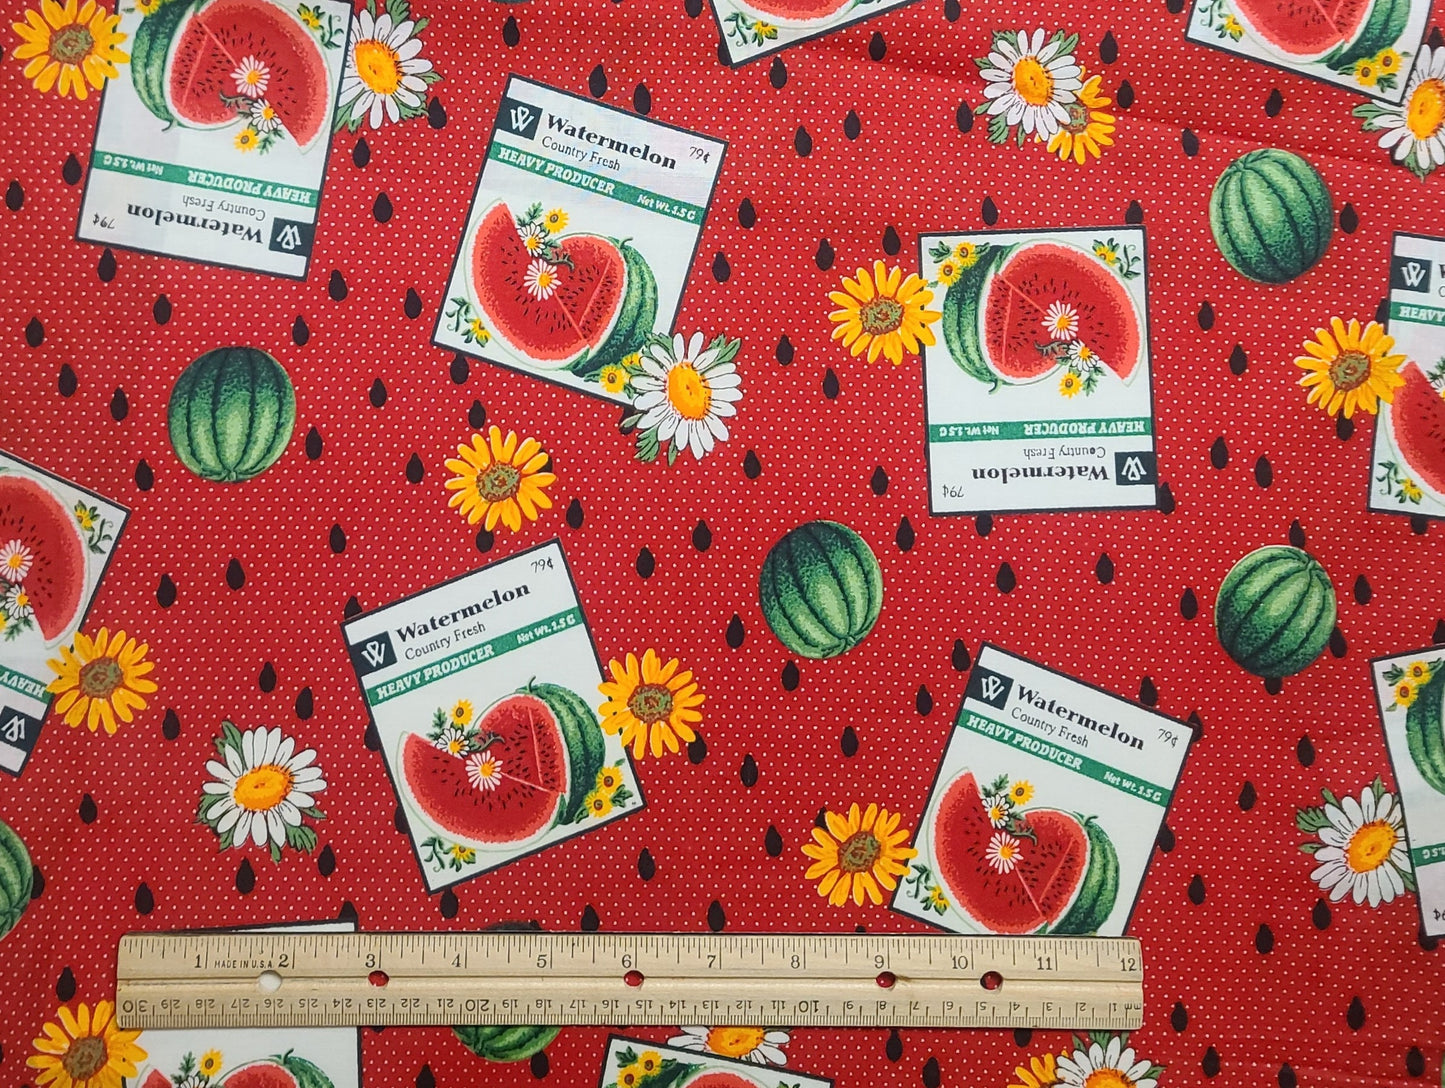 Springs Industries - Red and White Pindot Fabric / Watermelons, Daisies, Watermelon Seeds and Seed Packets